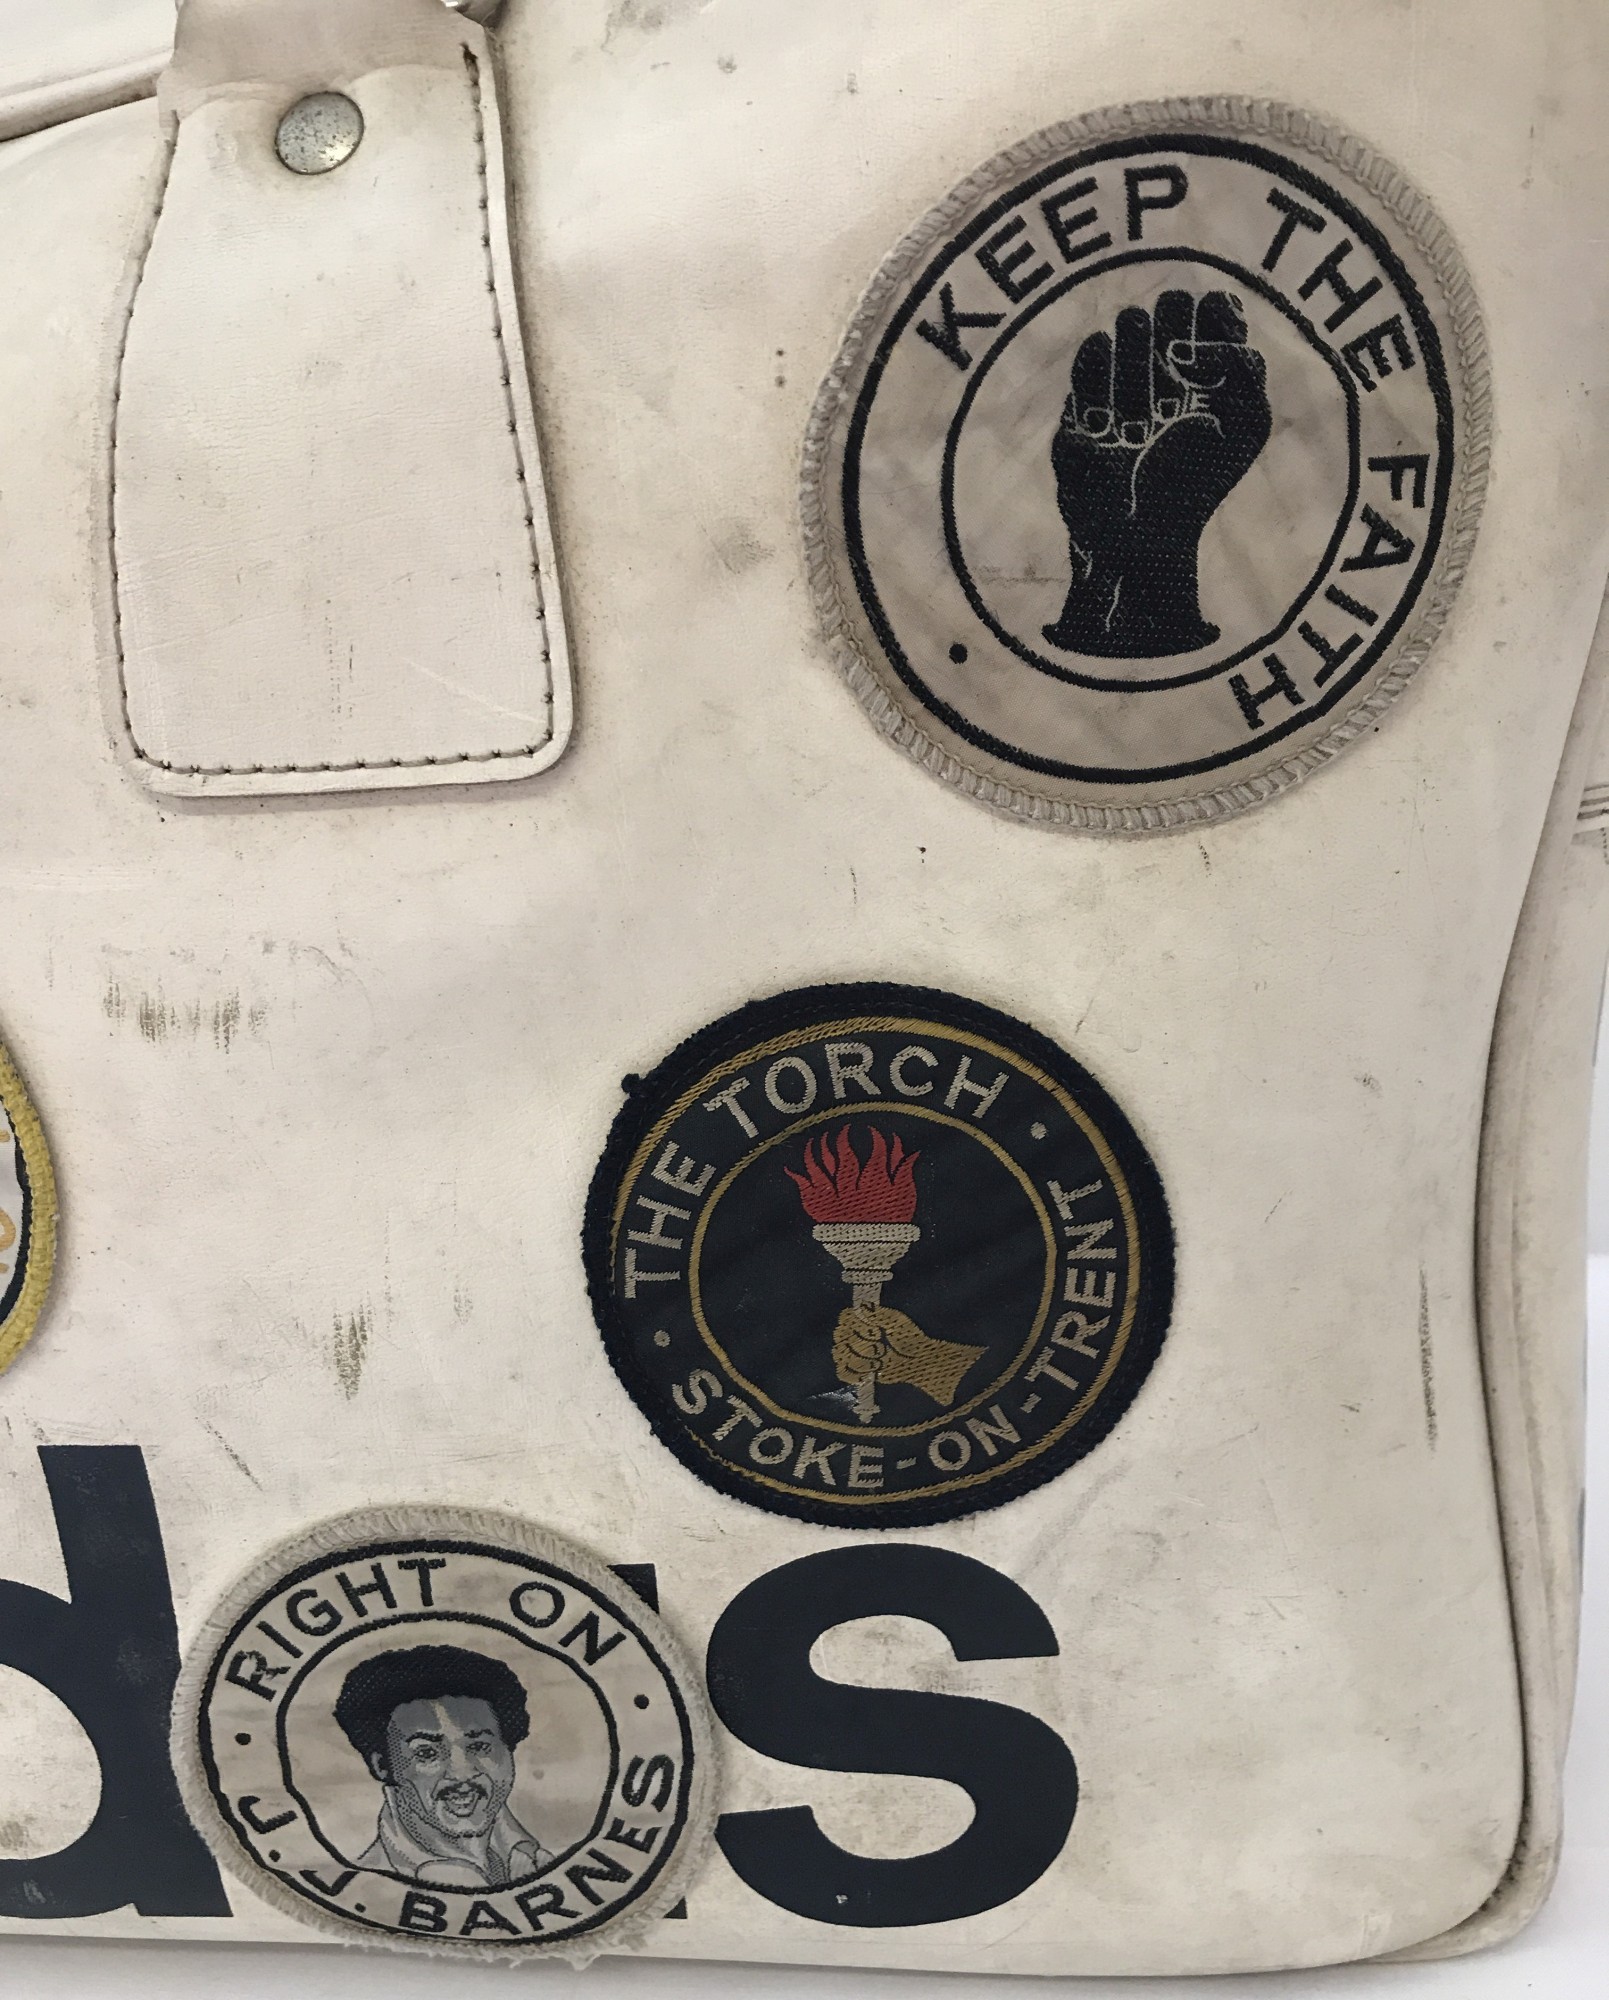 A 1970'S Peter Black Keighley Adidas holdall with original Wigan Northern Soul designs & patches. - Image 4 of 4